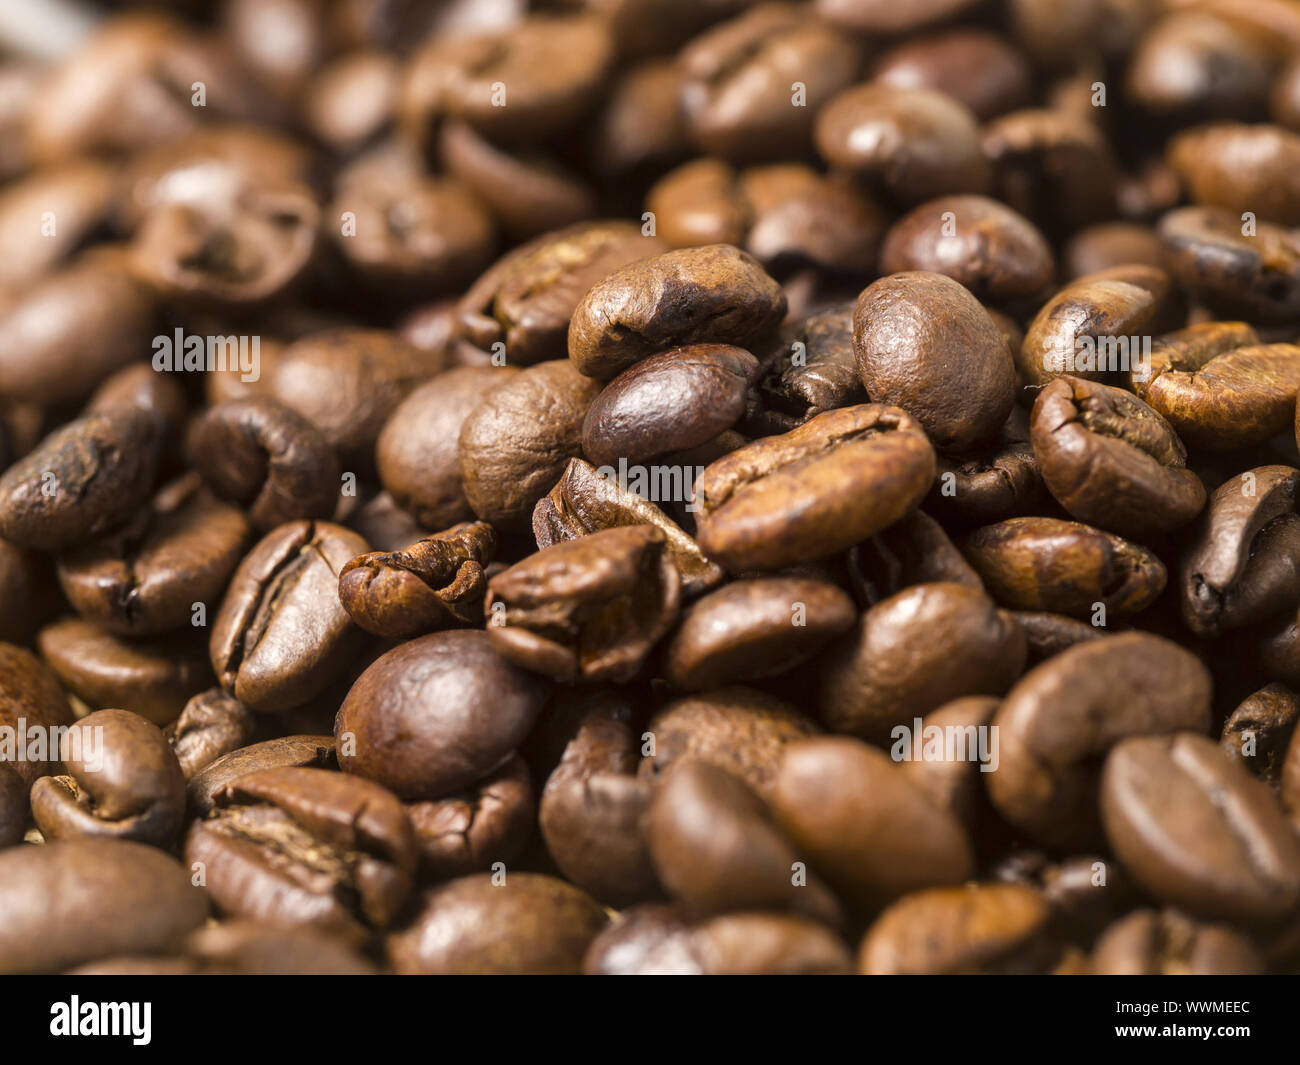 Roasted coffee beans Stock Photo